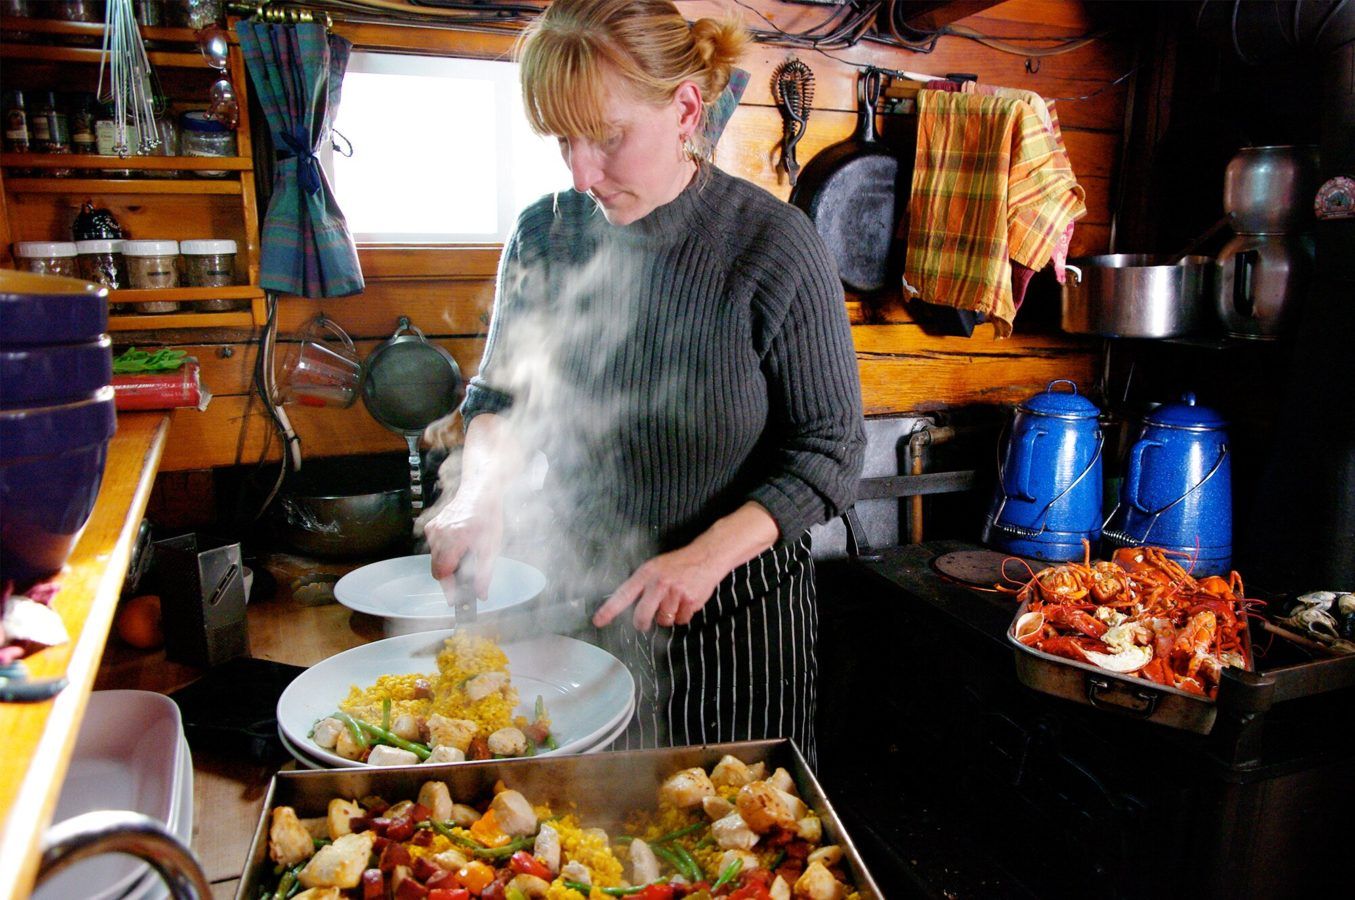 Tiny kitchen cooking tips from chef Annie Mahle, who works in a galley kitchen on a boat